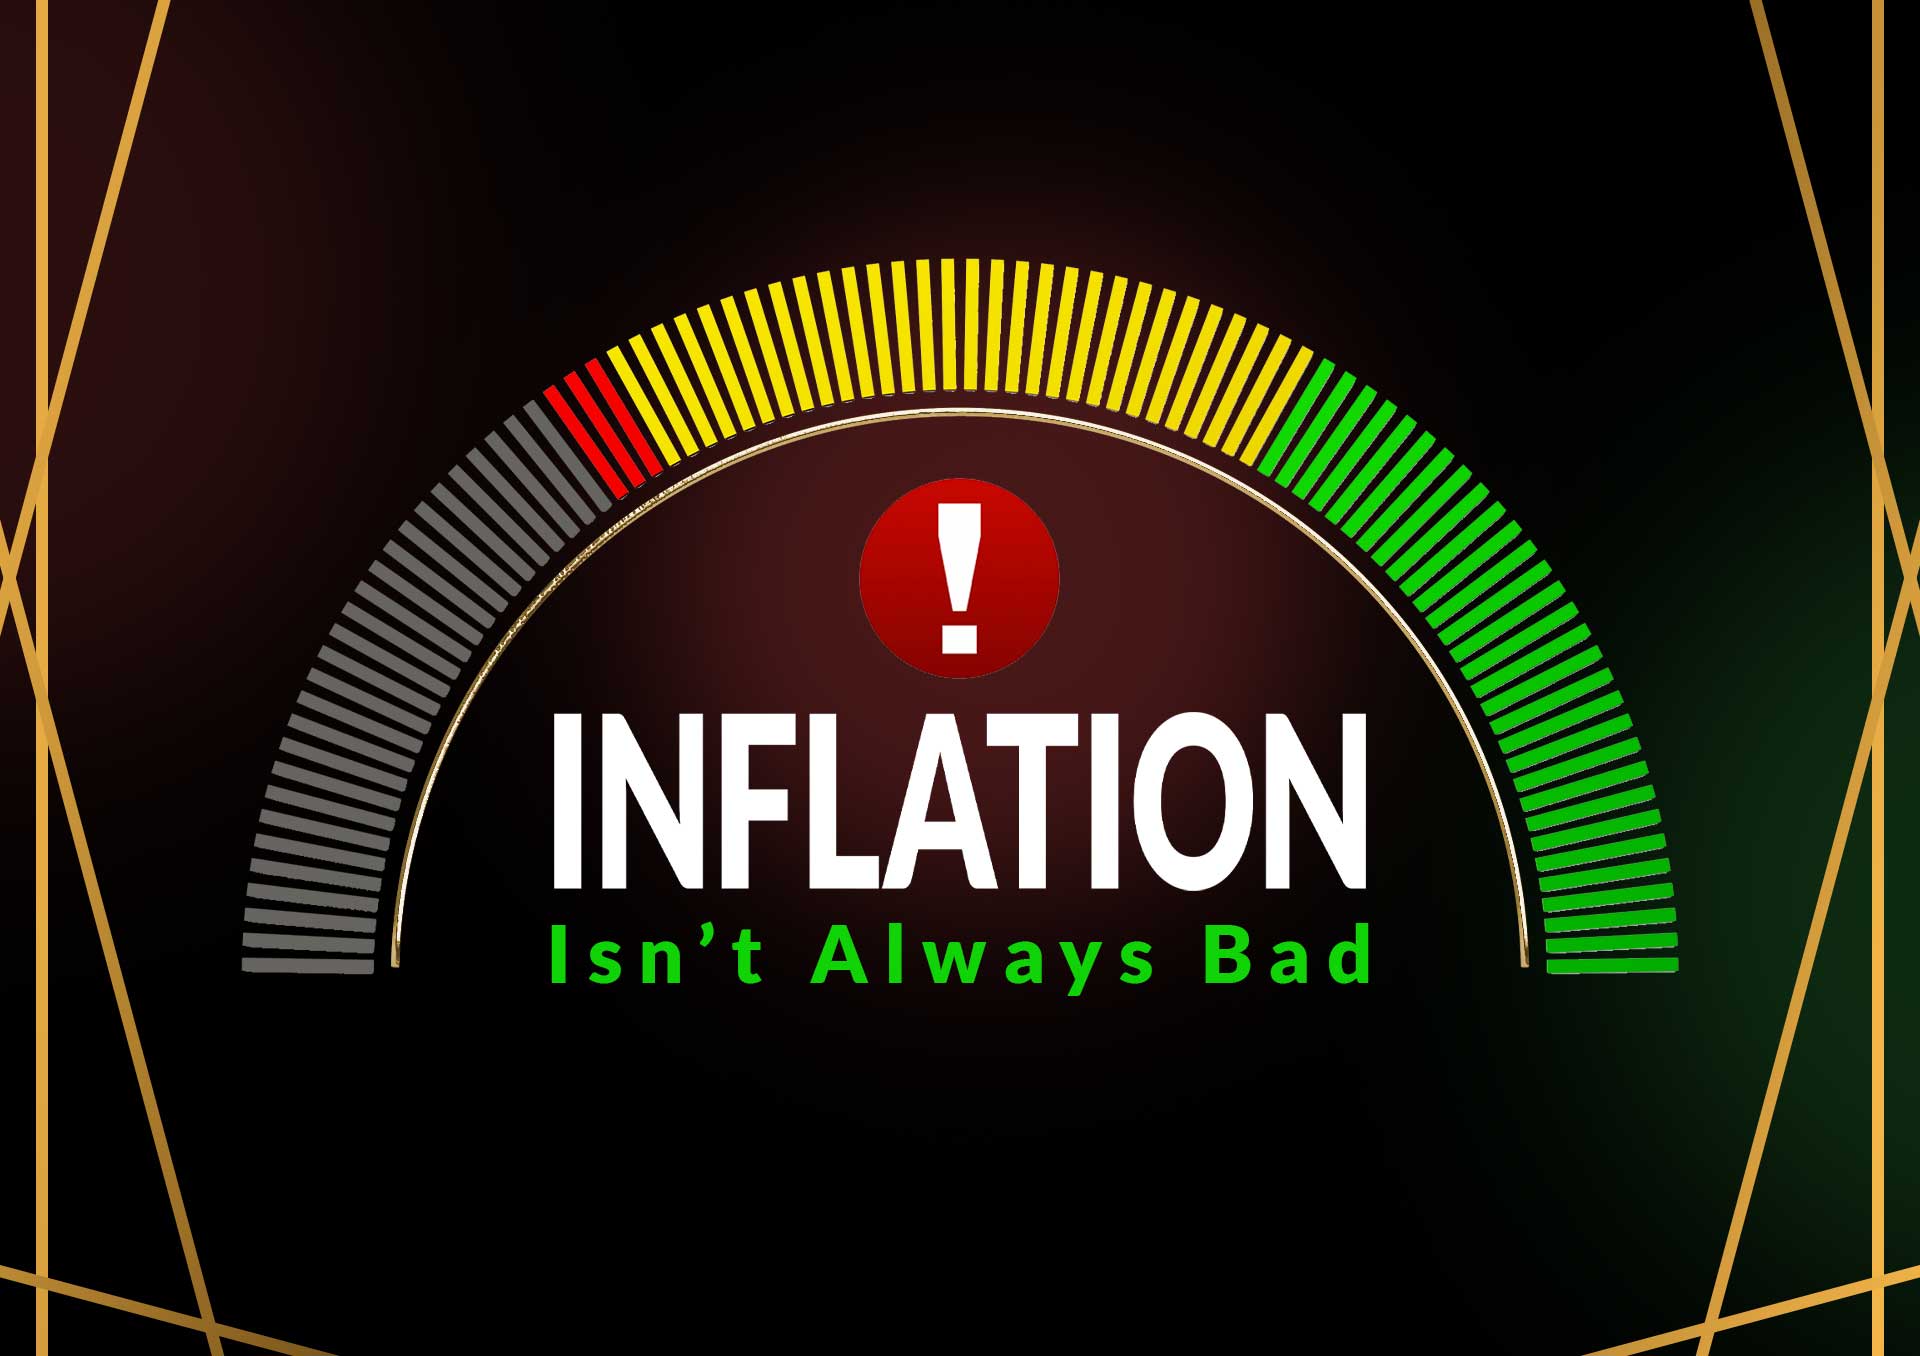 Inflation is not always bad